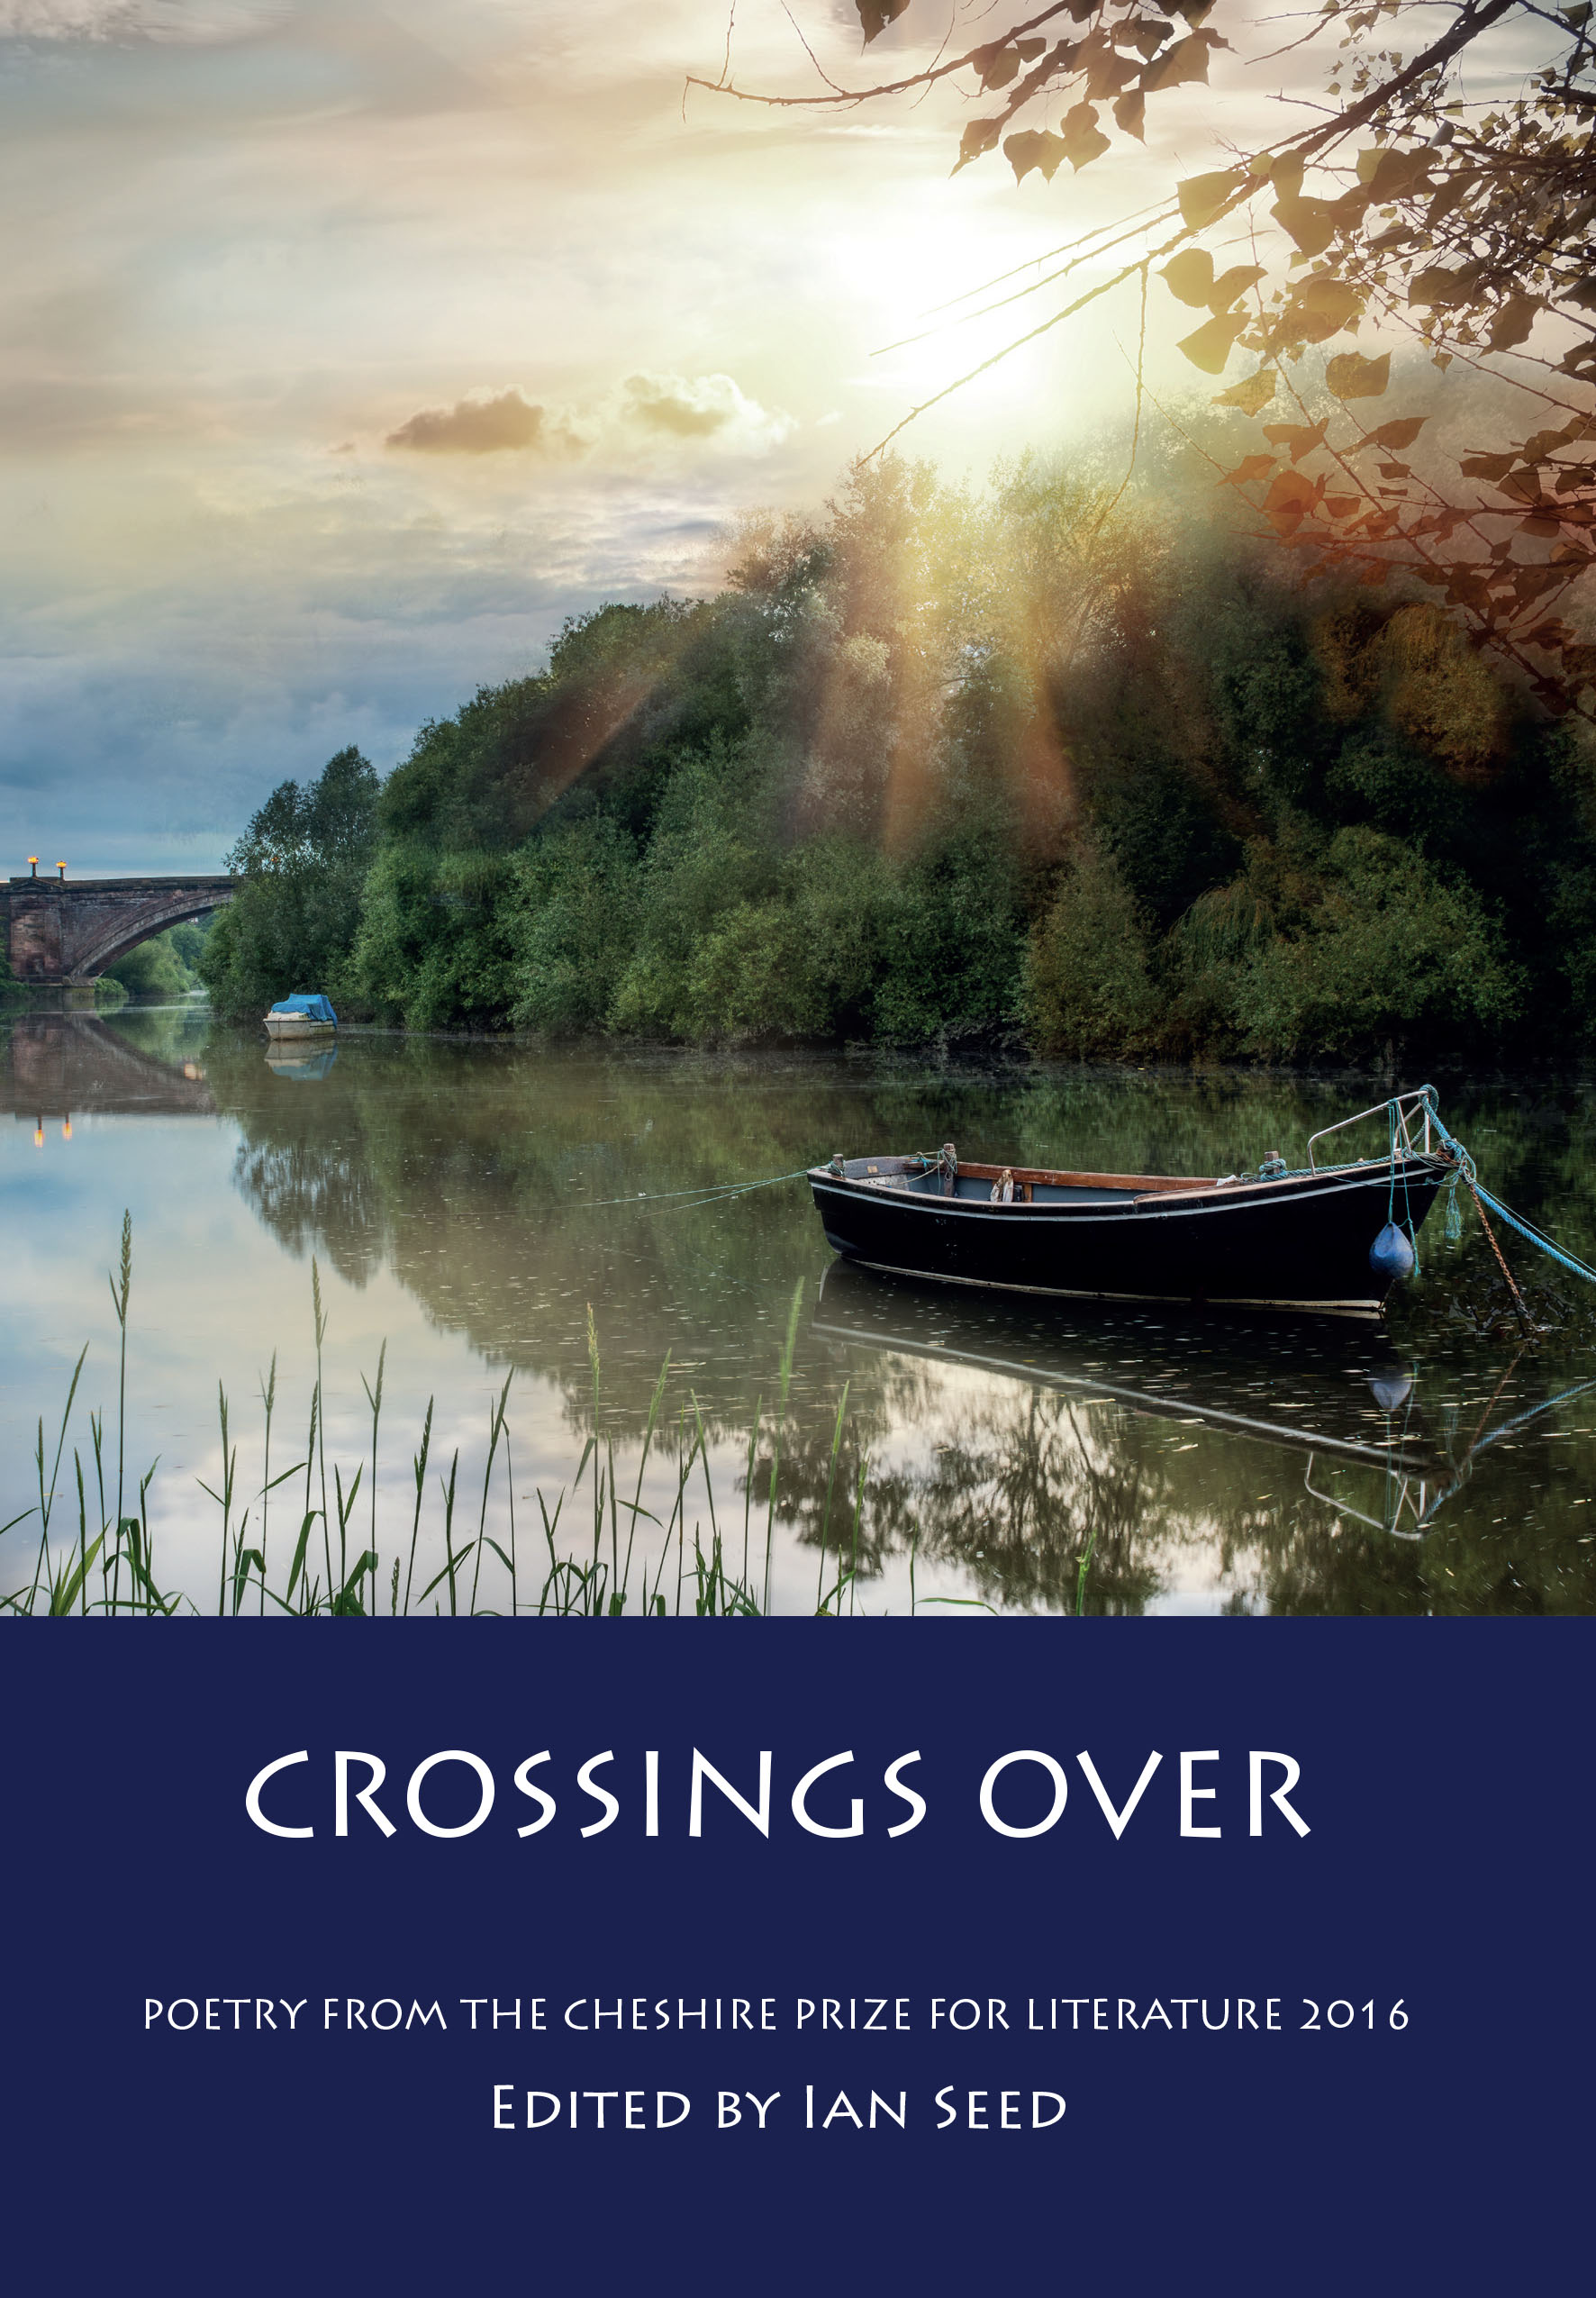 Crossings Over - Poetry from the Cheshire Prize for Literature 2016